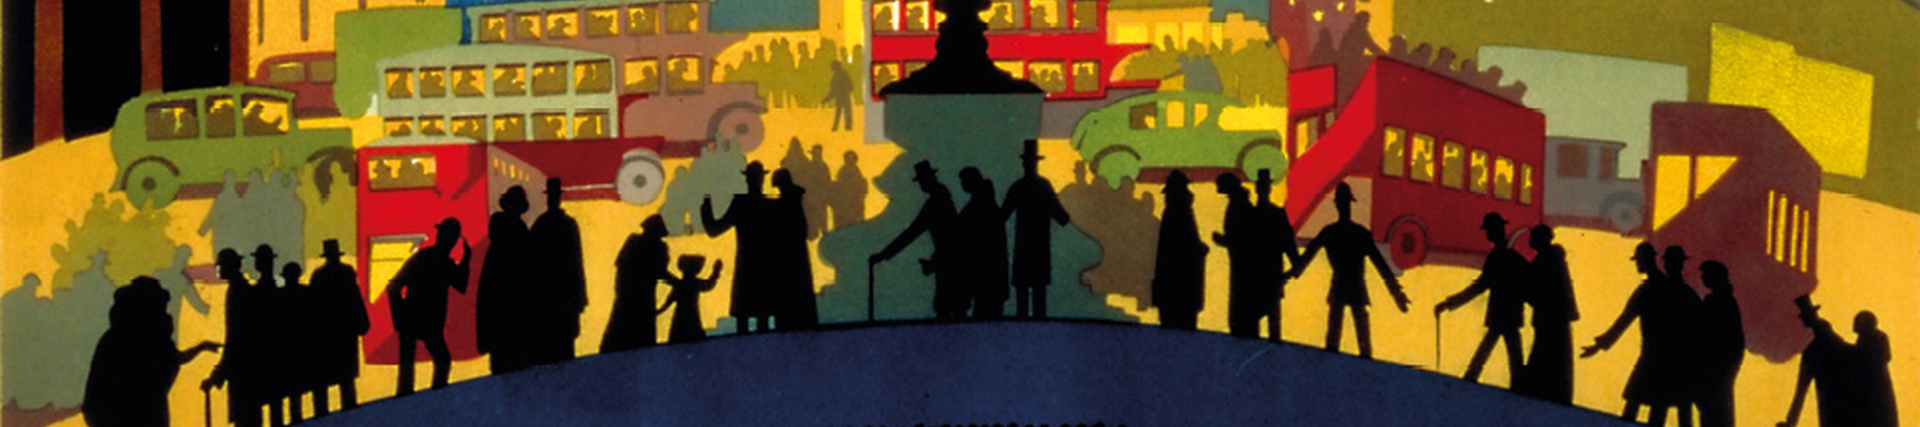 Poster of London at night with li up buildings and silhouettes of people in front